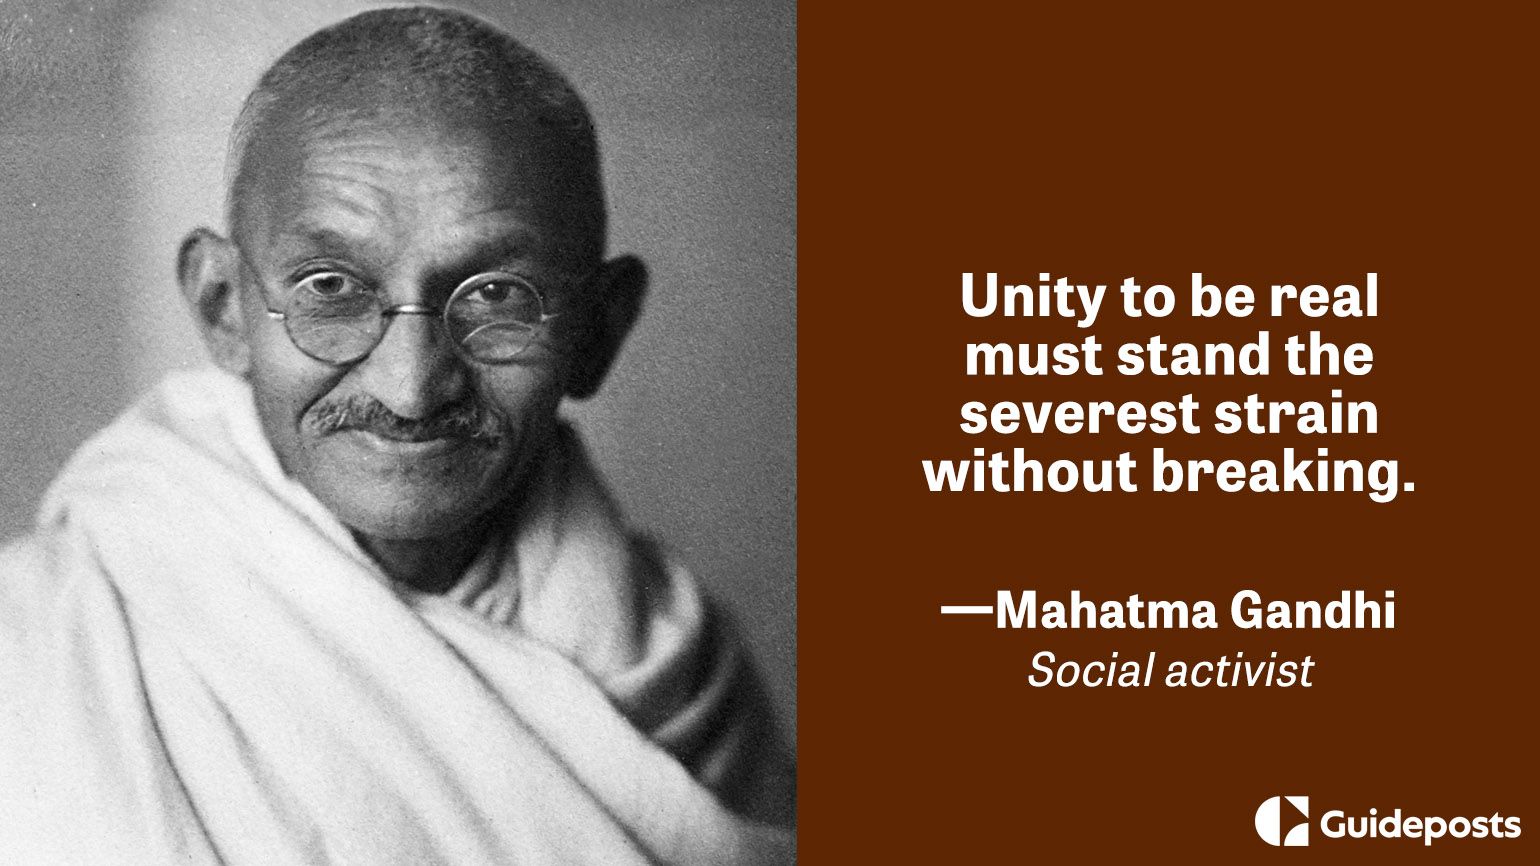 Unity to be real must stand the severest strain without breaking.  - Mahatma Gandhi